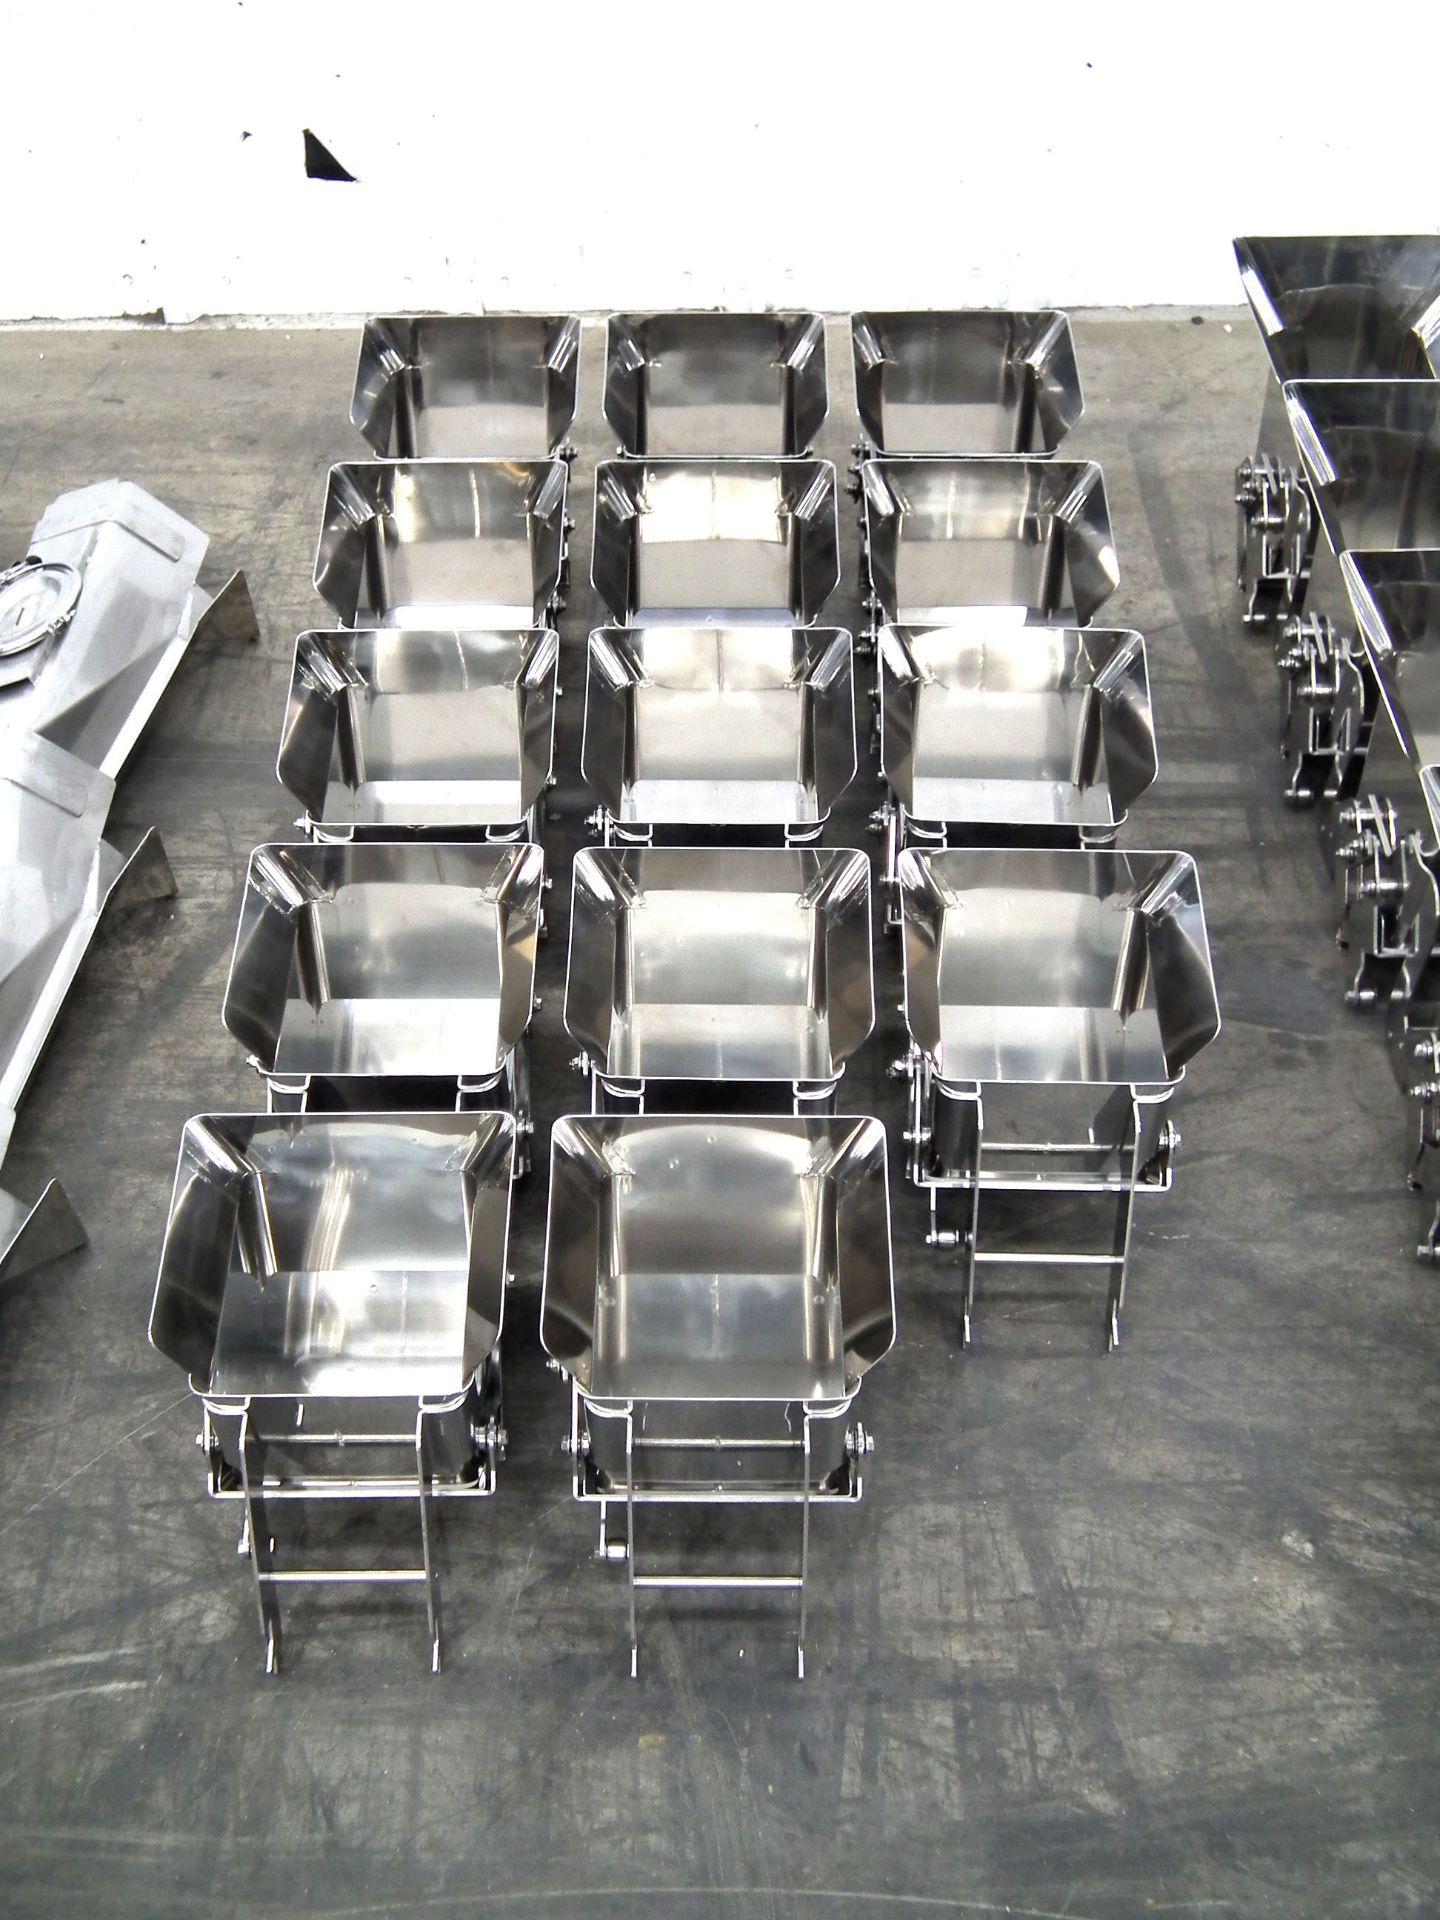 Ishida 14 Head Scale Buckets and Cones for CCW-214 - Image 5 of 10